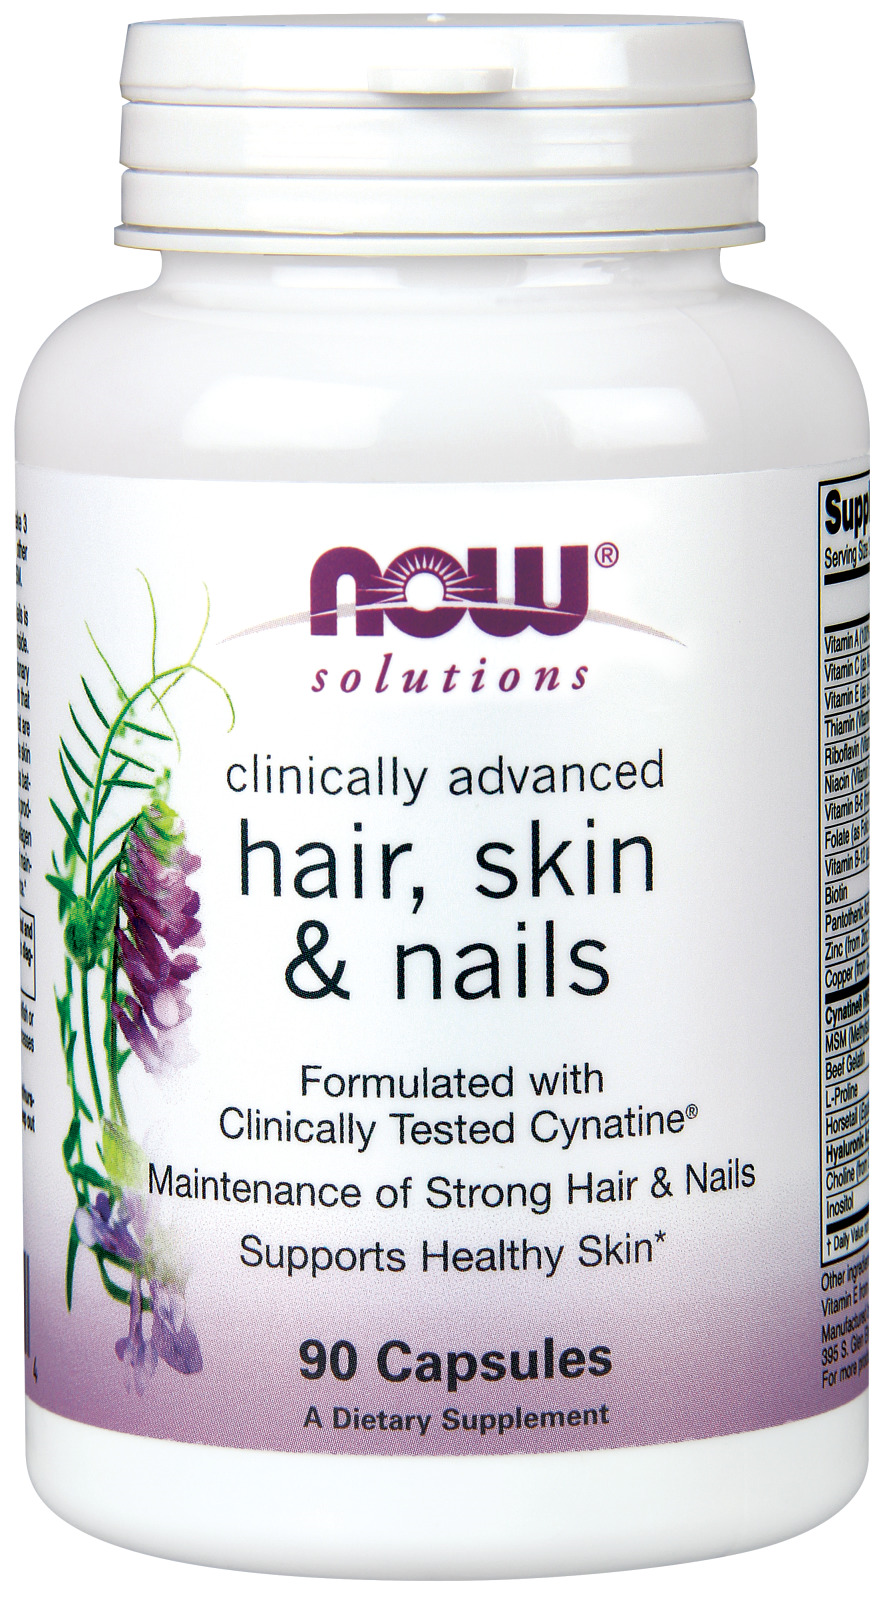 Hair, Skin & Nails Capsules - The Daily Apple